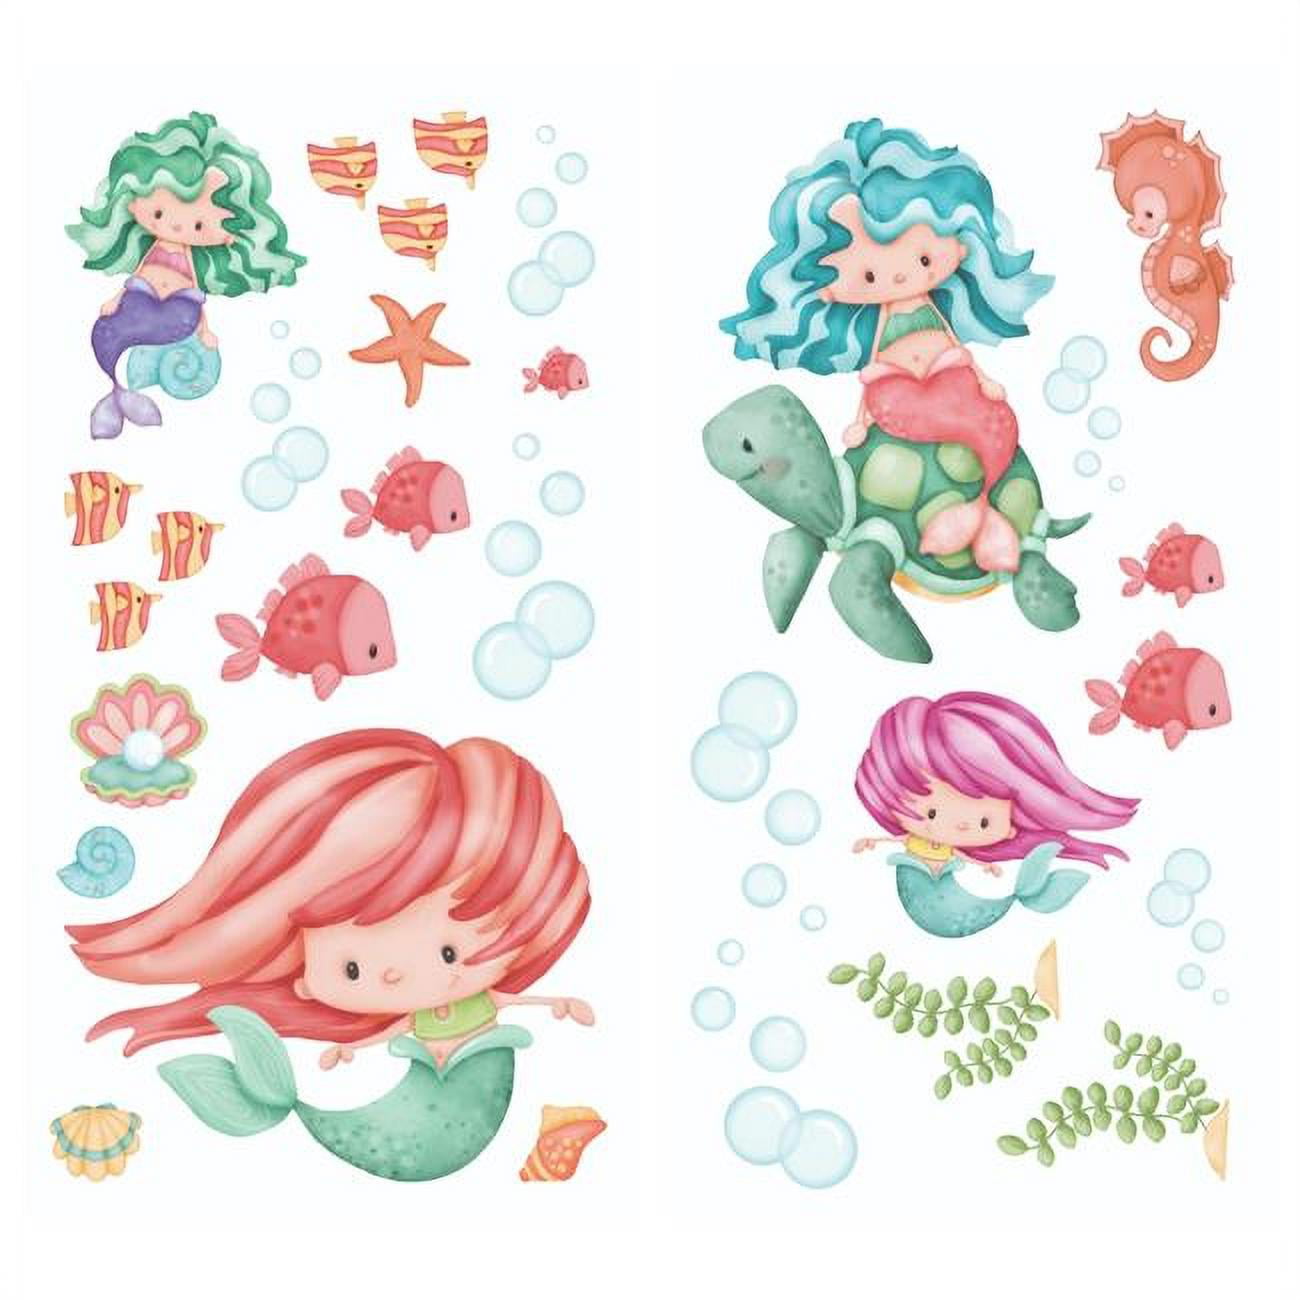 Picture of Borders Unlimited 10025 Magical Mermaids Applique Wall Decal Stickers, Multi Color - Super Jumbo